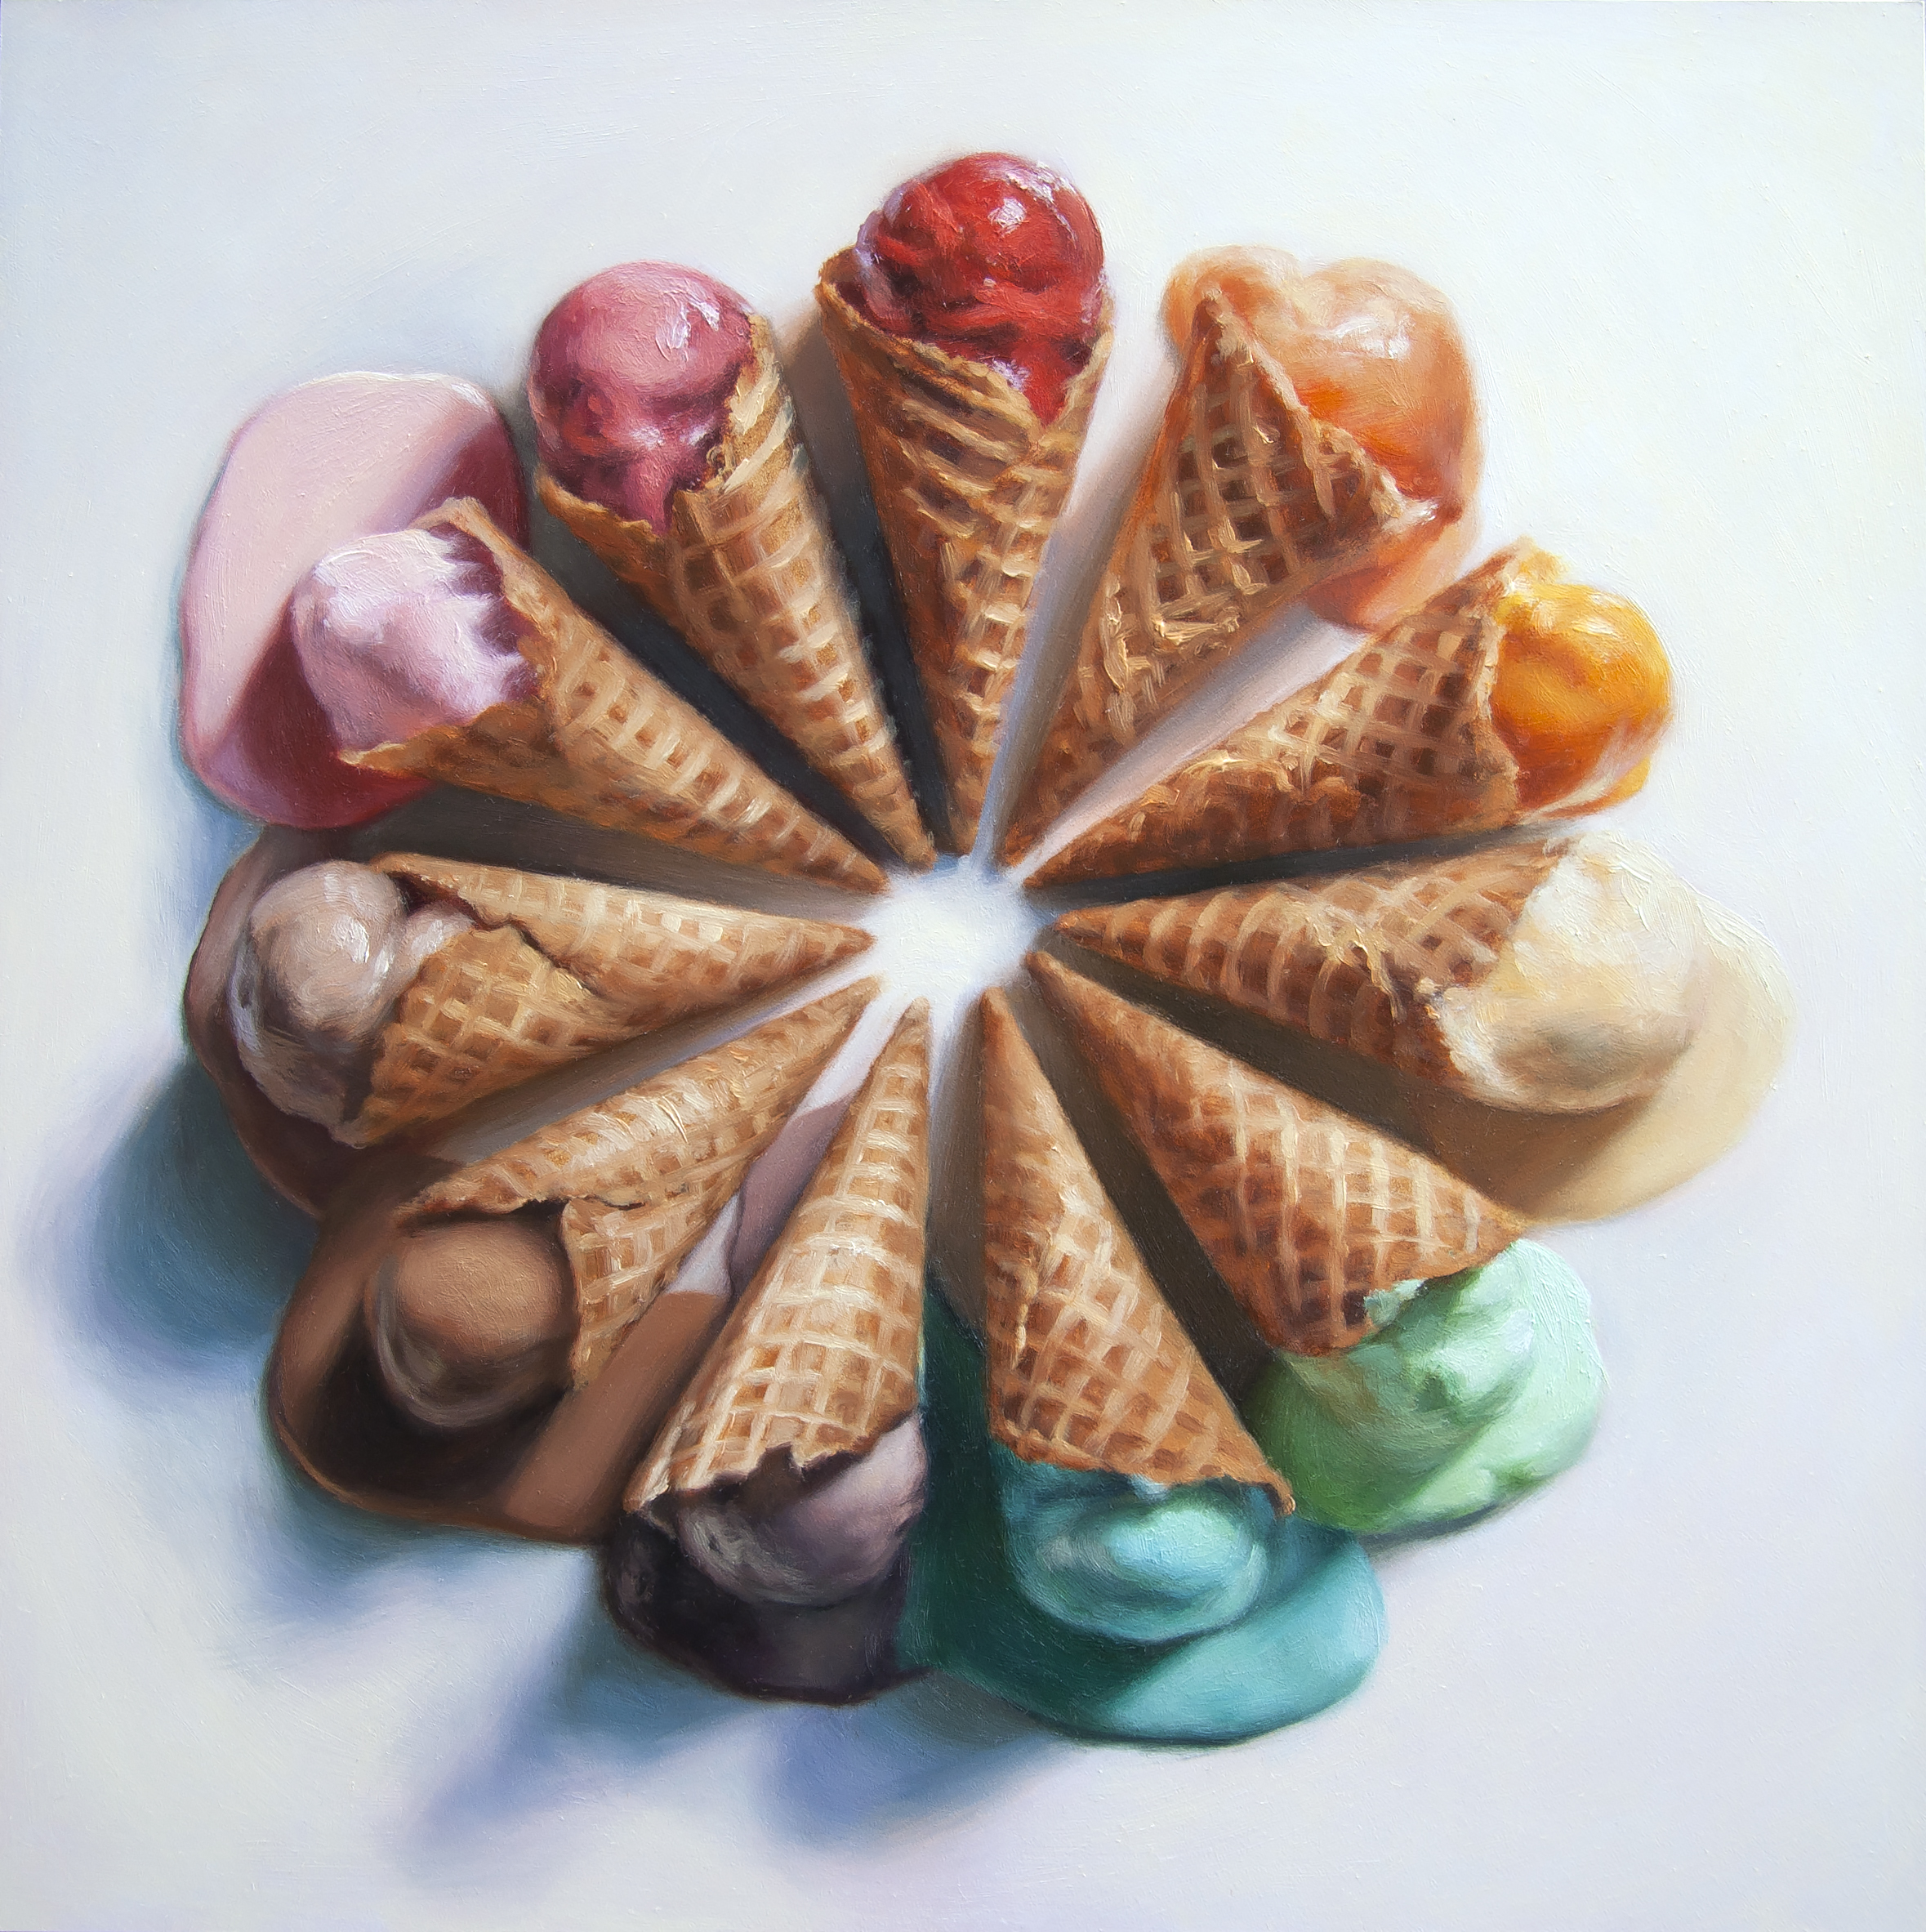   We All Scream For Ice Cream!   12" x 12"  Oil on Panel  SOLD 